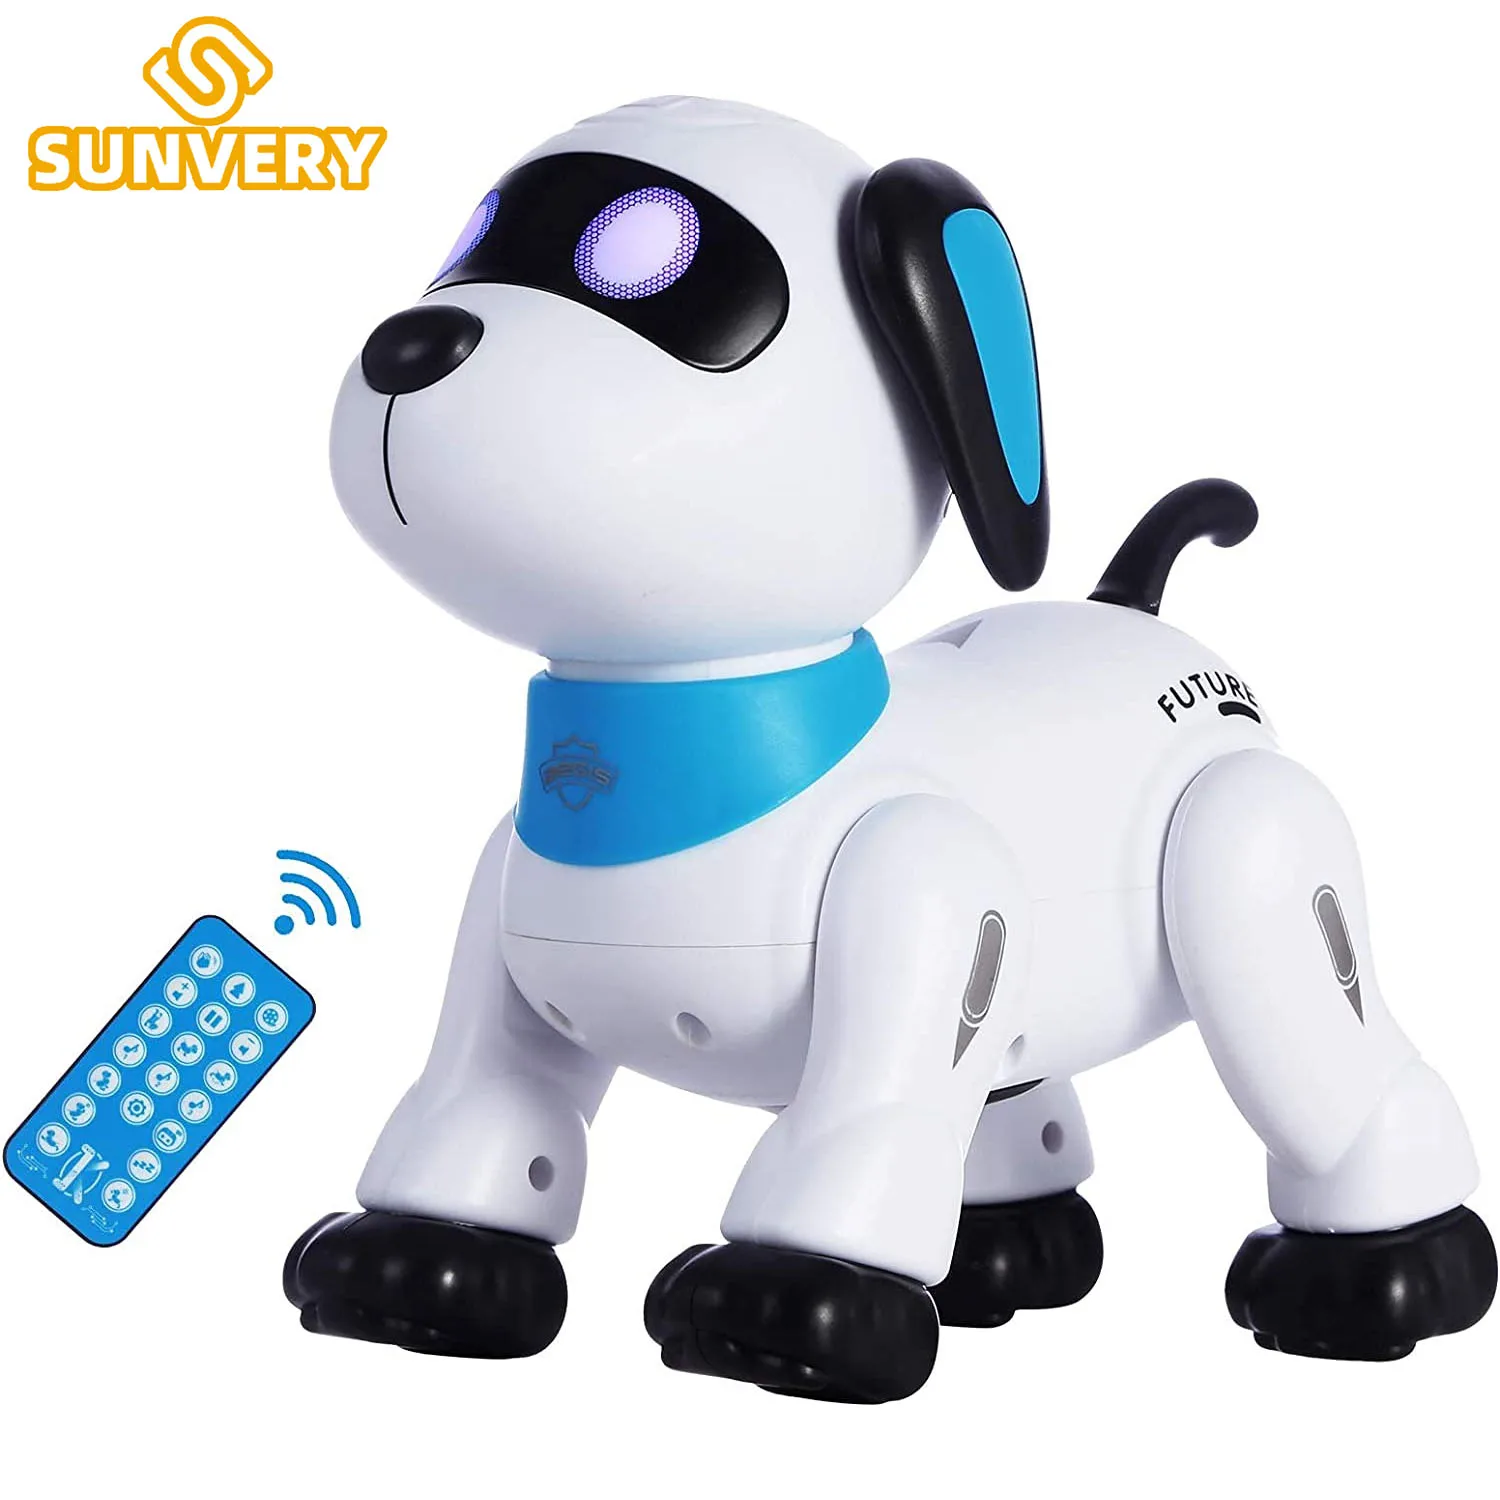 Og toy programmable interactive smart dancing robots rc stunt dog with sound electronic thumb200